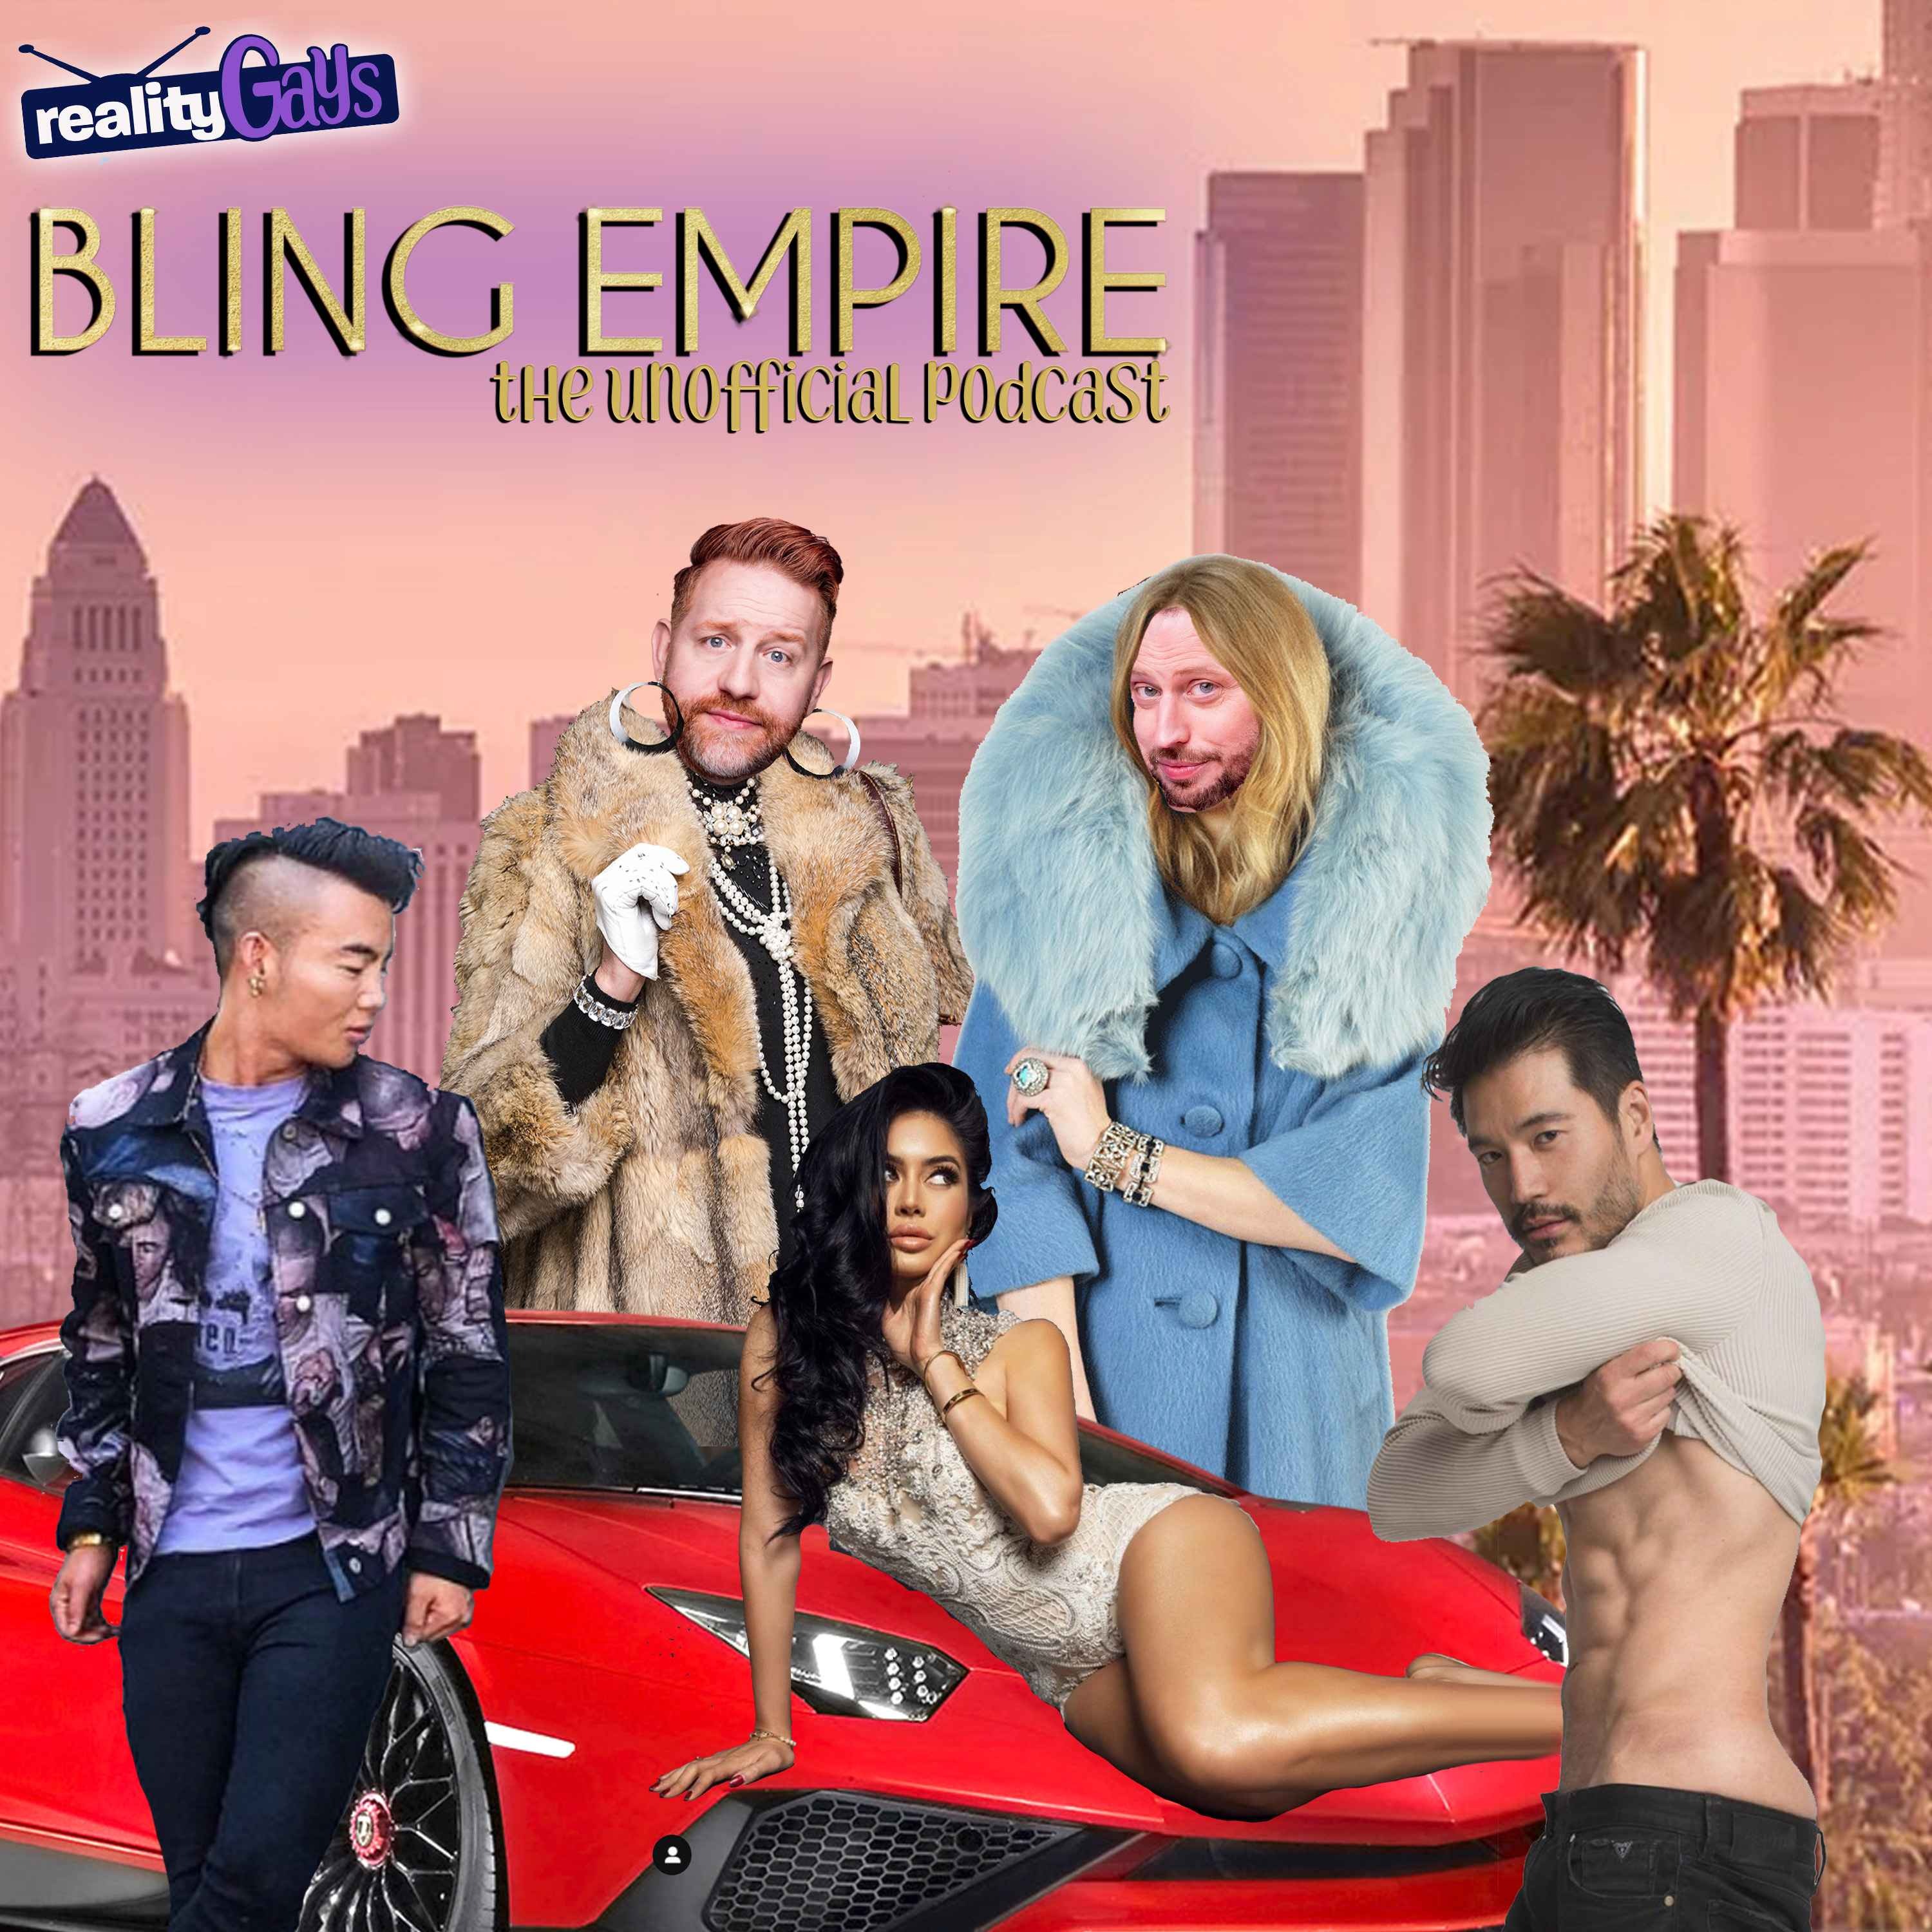 BLING EMPIRE: 0201 "Diamonds and Deception" and 0202 "Rumor Has it" Image